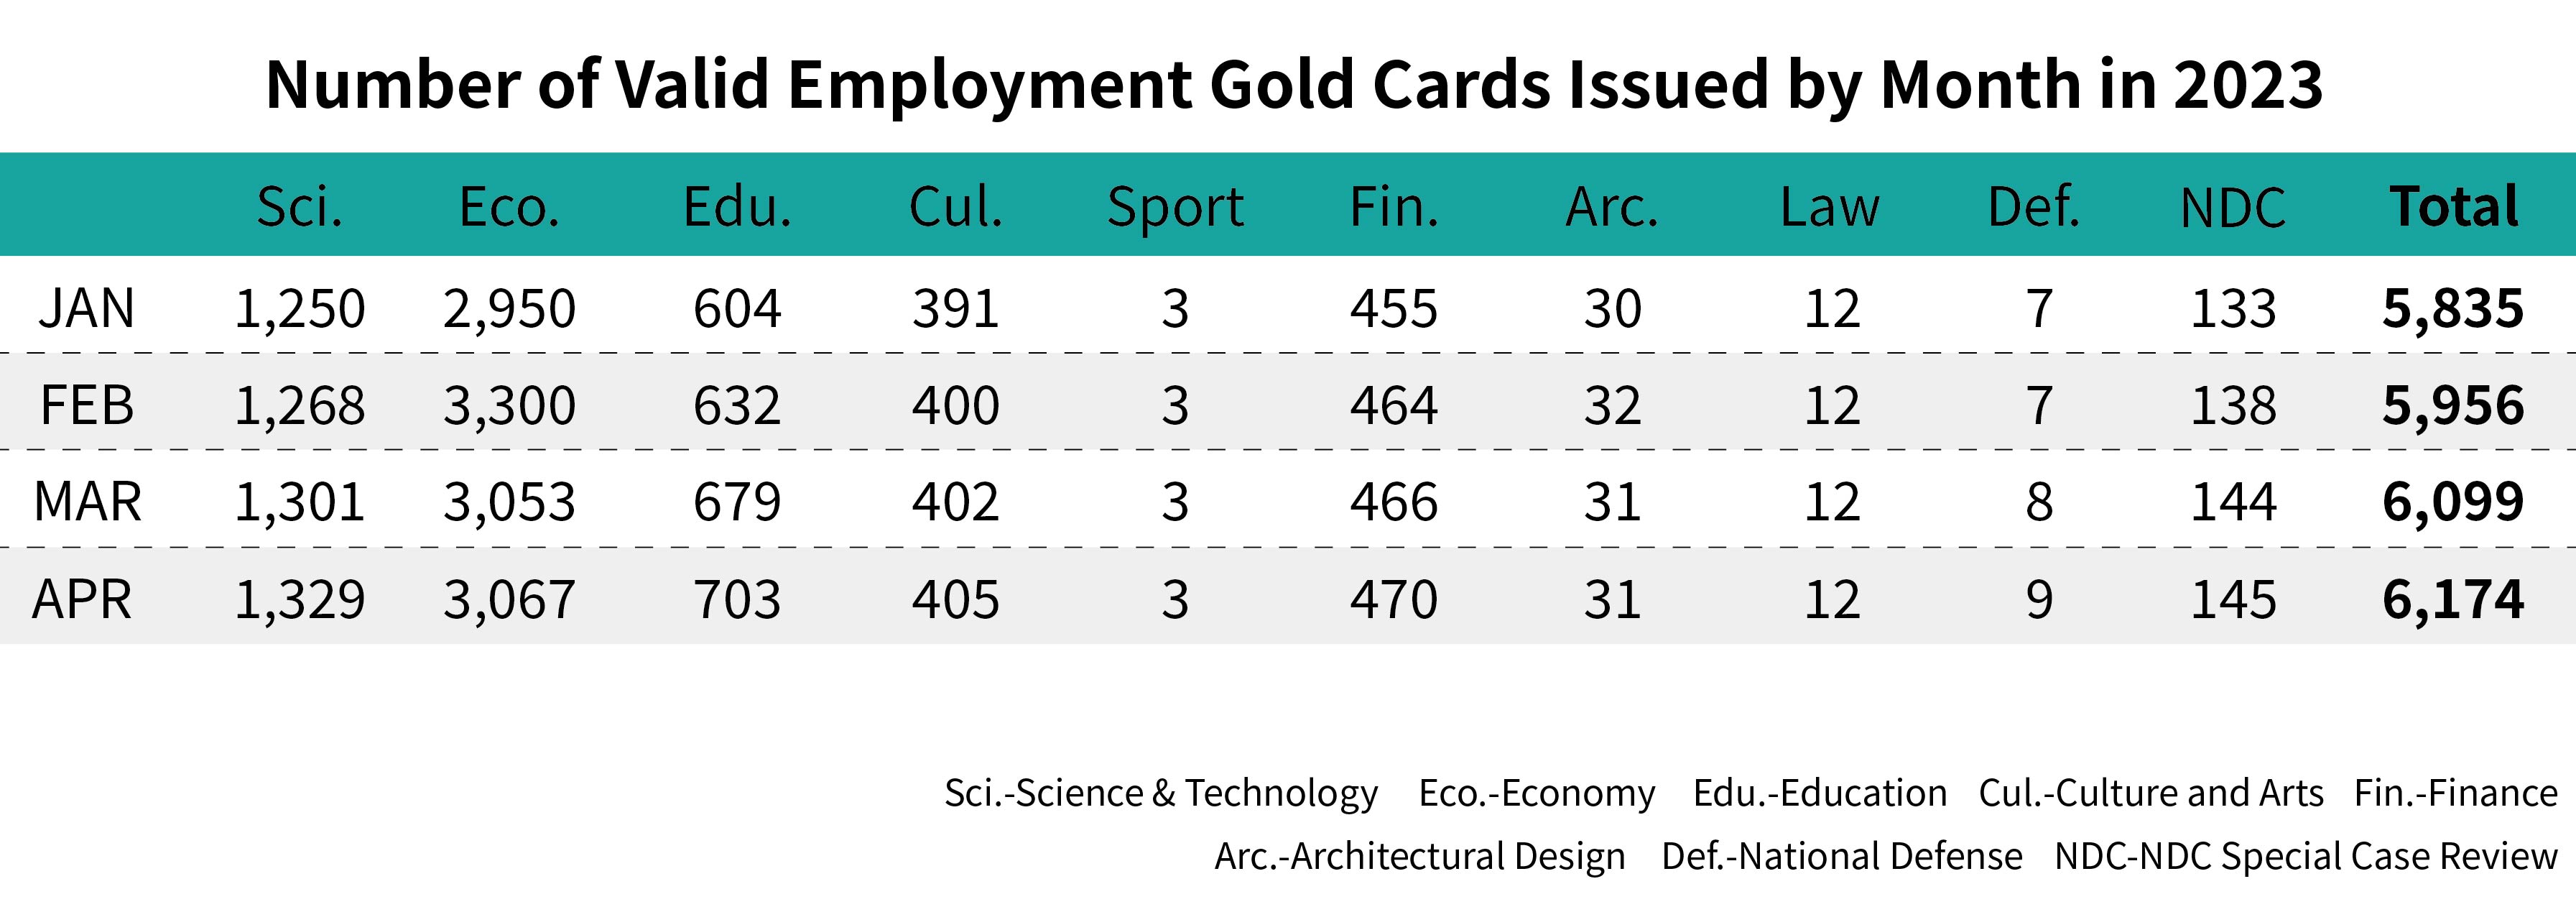 Number of Valid Employment Gold Cards Issued by Month-April